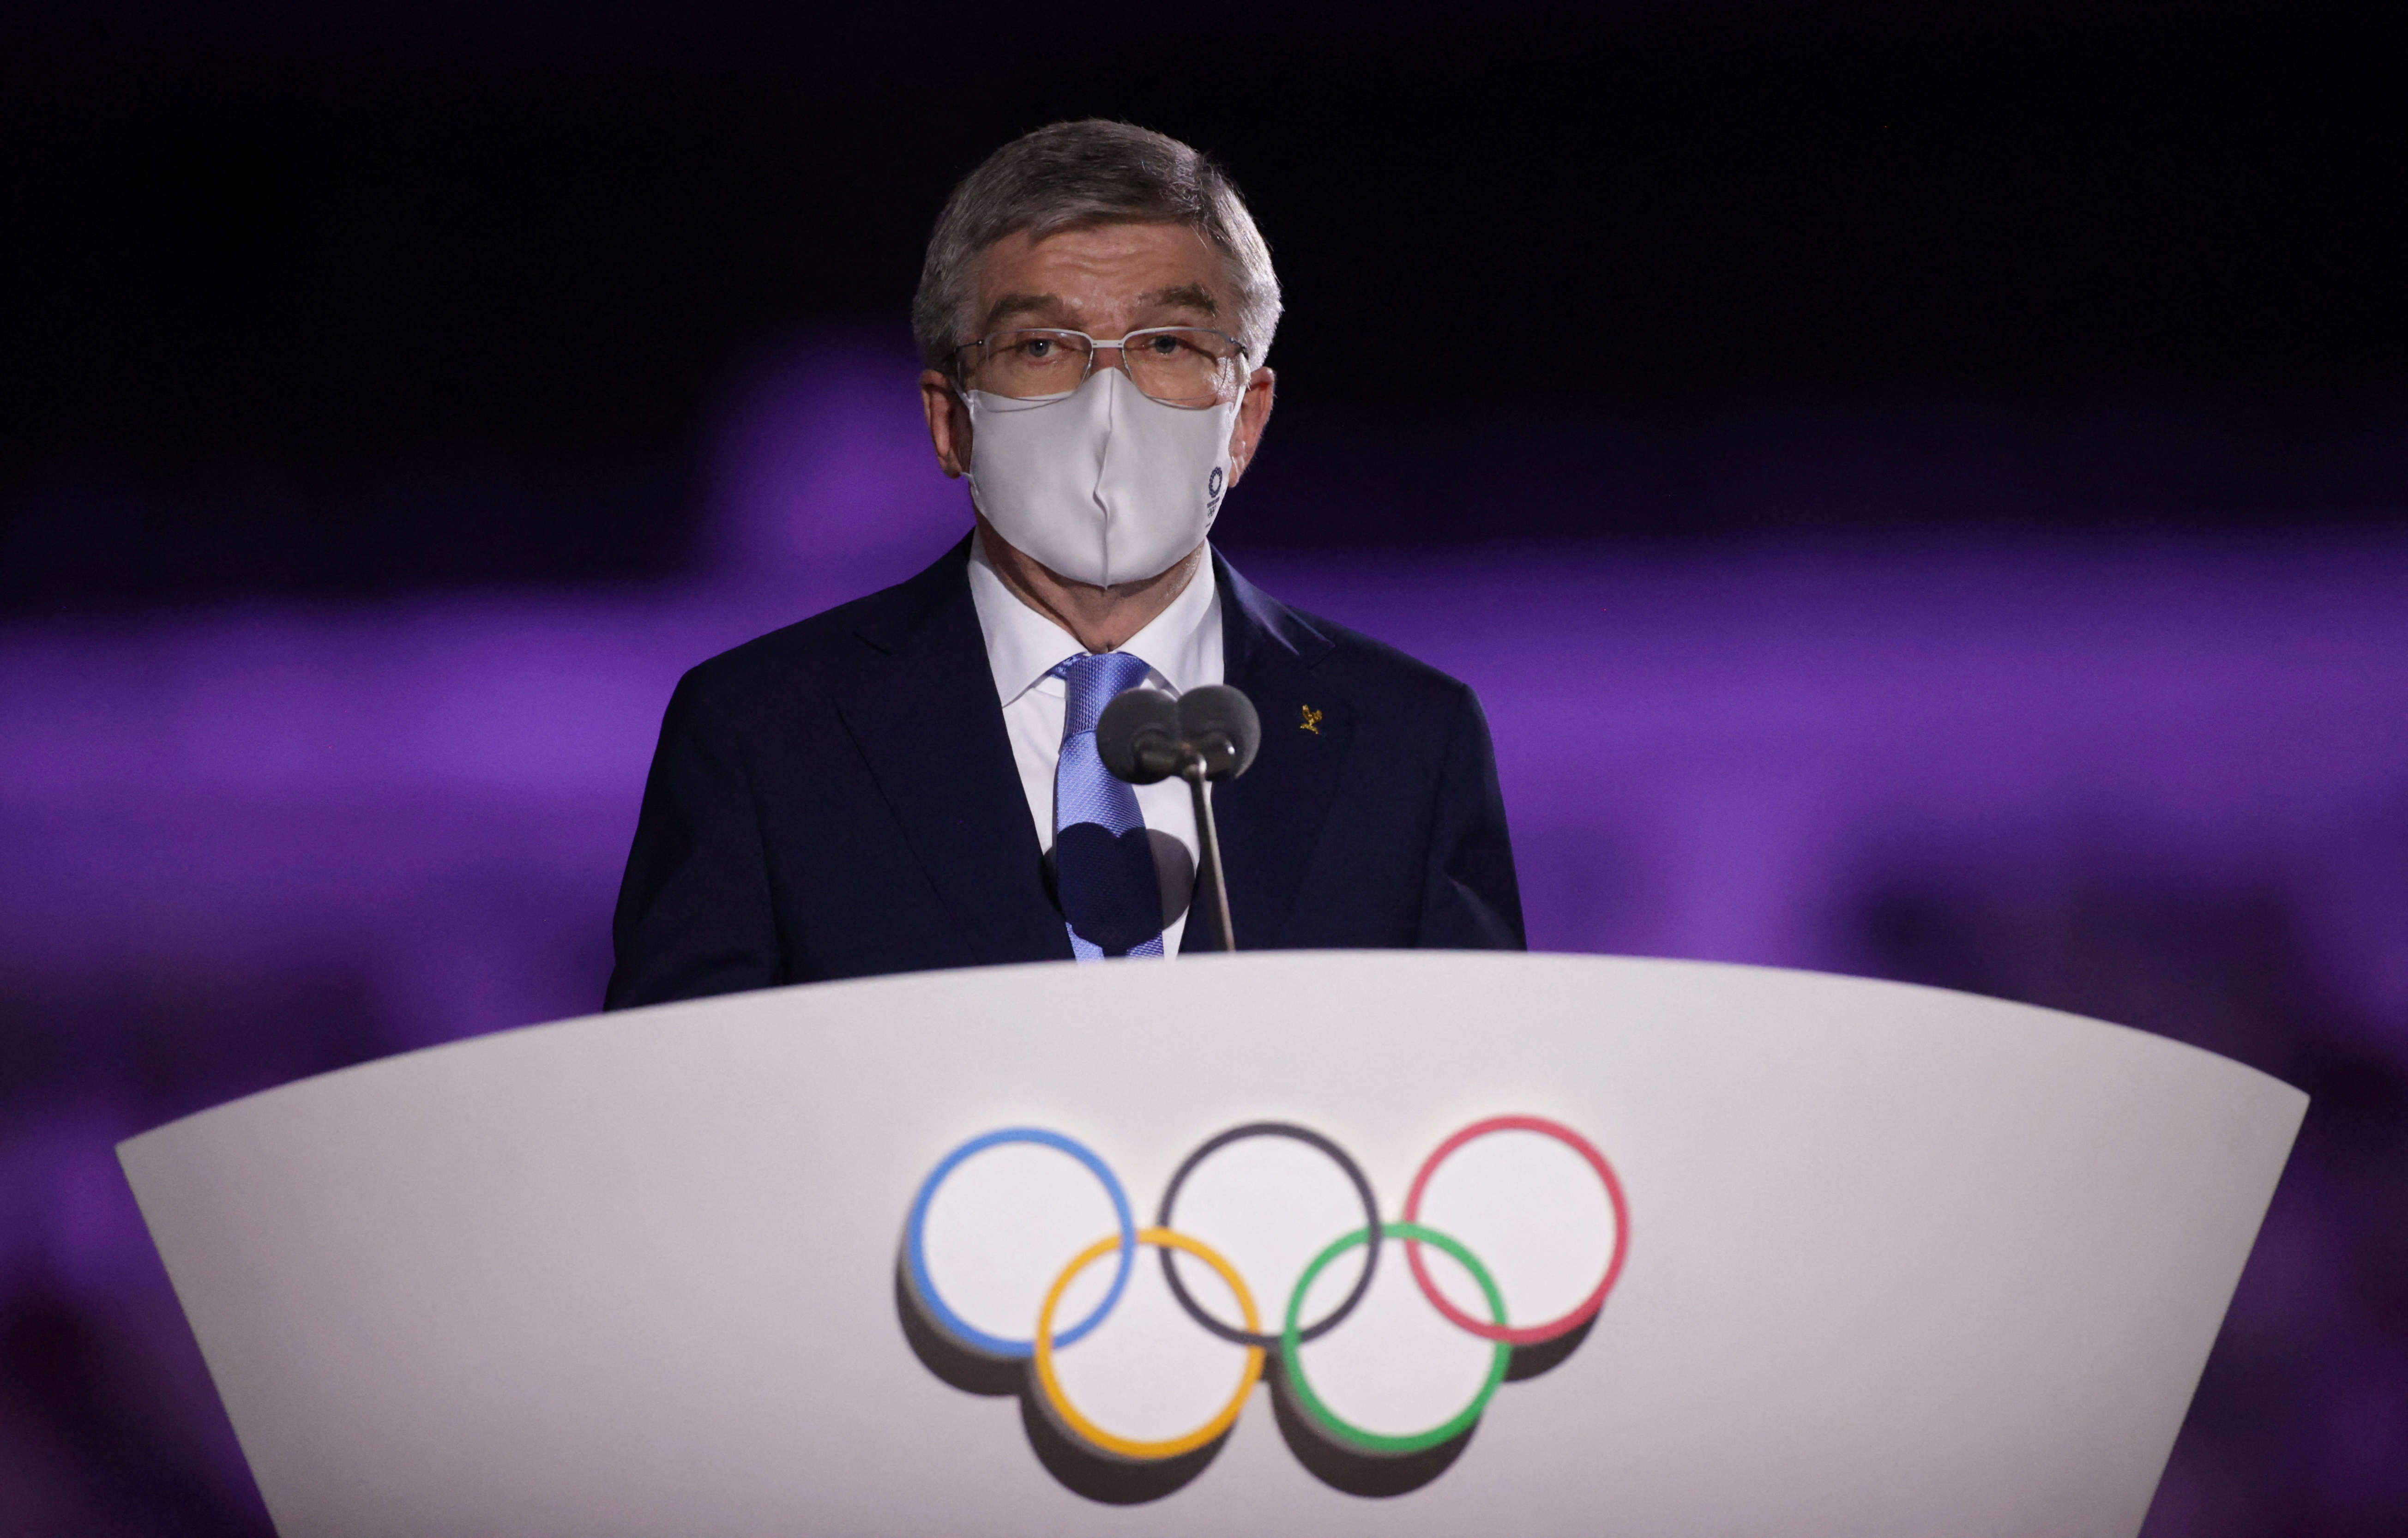 FILE PHOTO: Tokyo 2020 Olympics - The Tokyo 2020 Olympics Opening Ceremony - Olympic Stadium, Tokyo, Japan - July 23, 2021. International Olympic Committee (IOC) President Thomas Bach speaks during a speech at the opening ceremony REUTERS/Hannah Mckay/File Photo